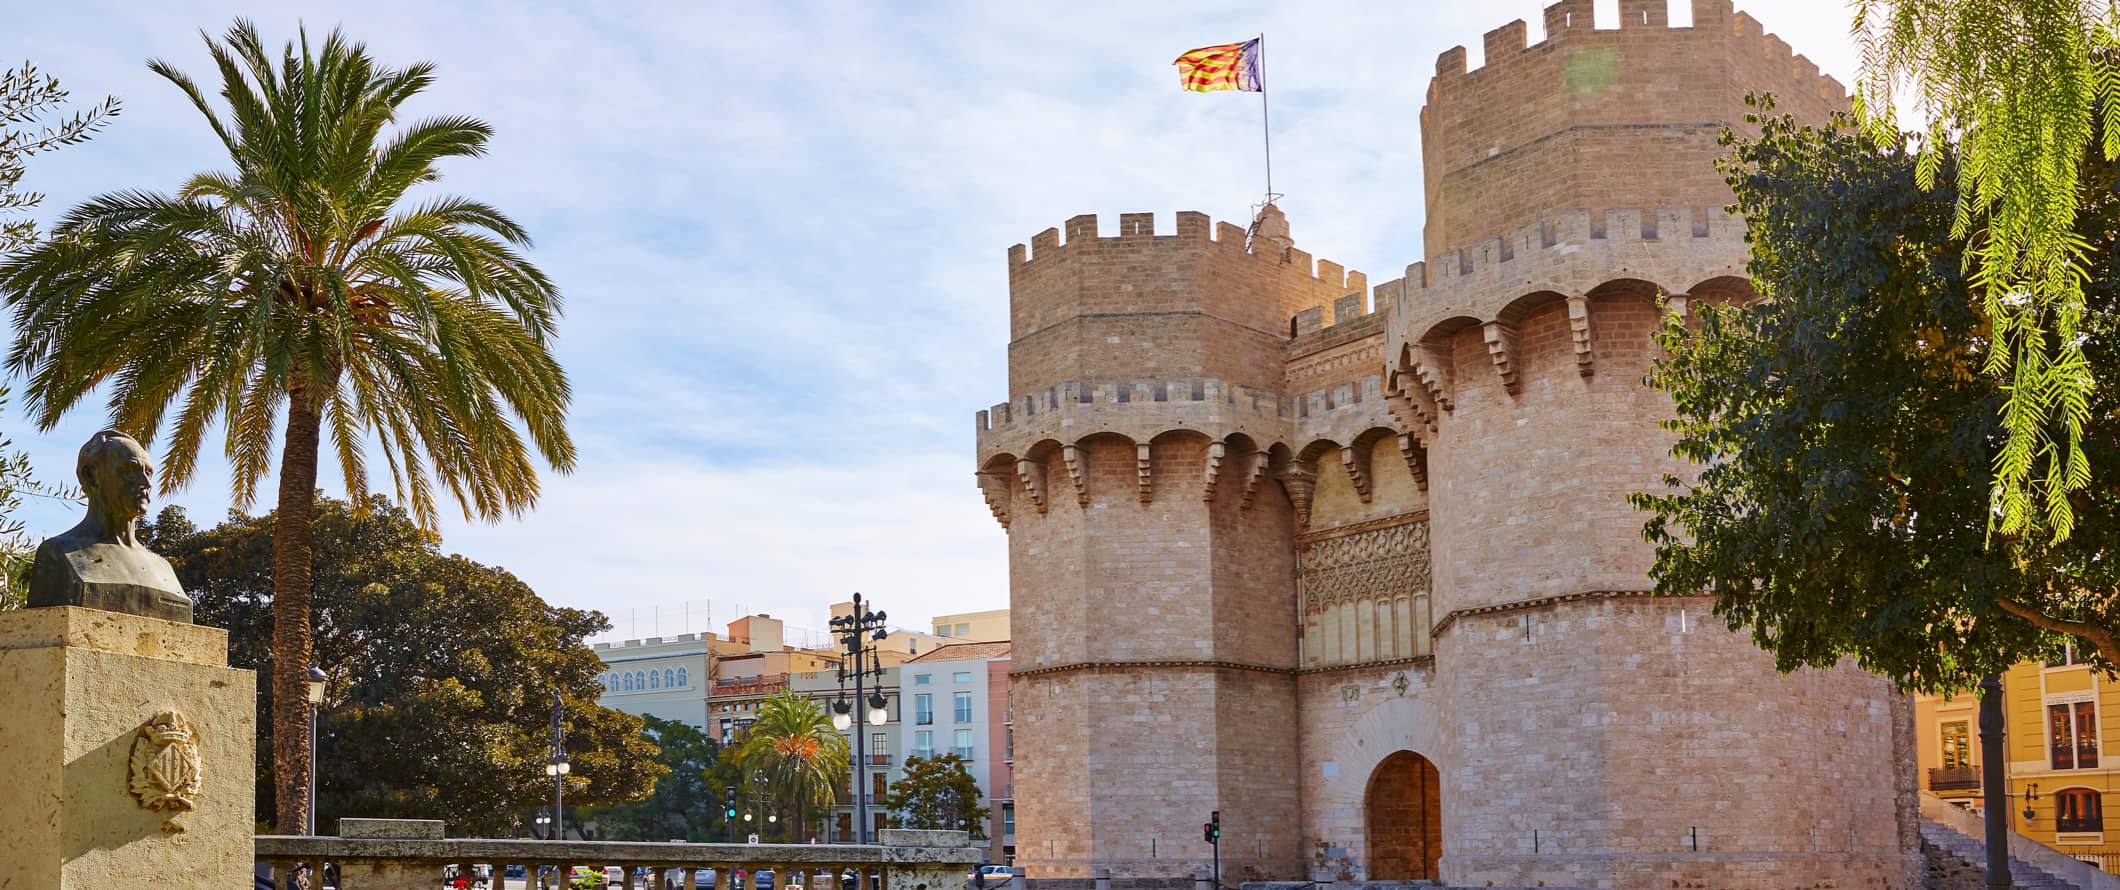 An old stone fort in Valencia, Spain